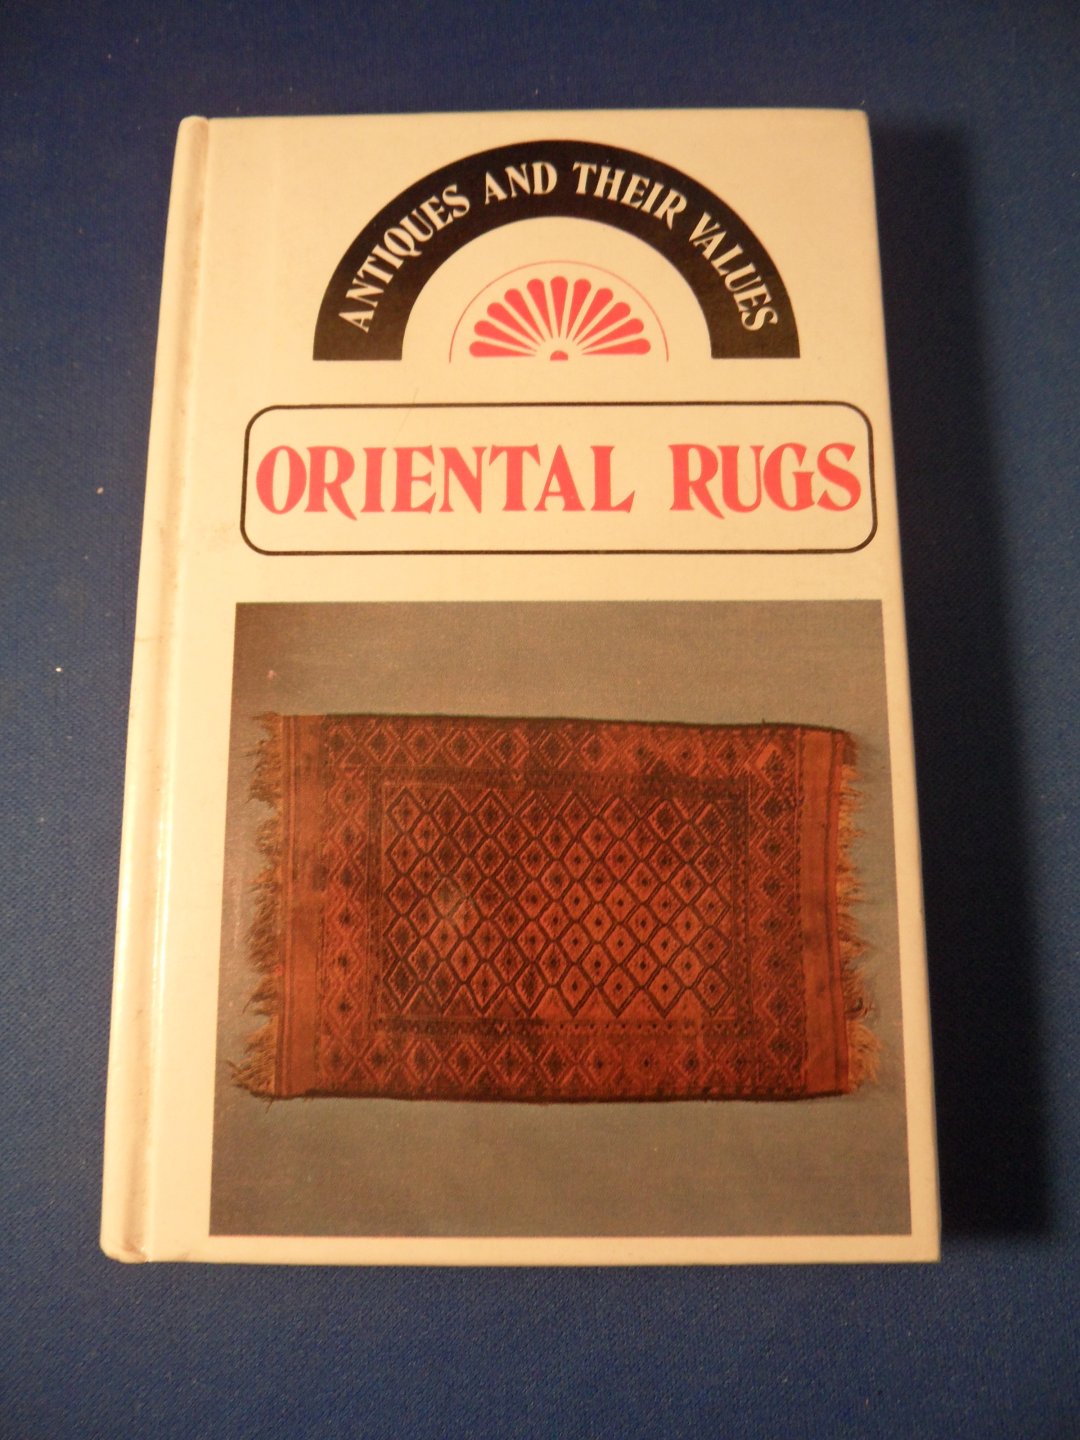 Curtis, Tony - Oriental rugs. Antiques and their values.